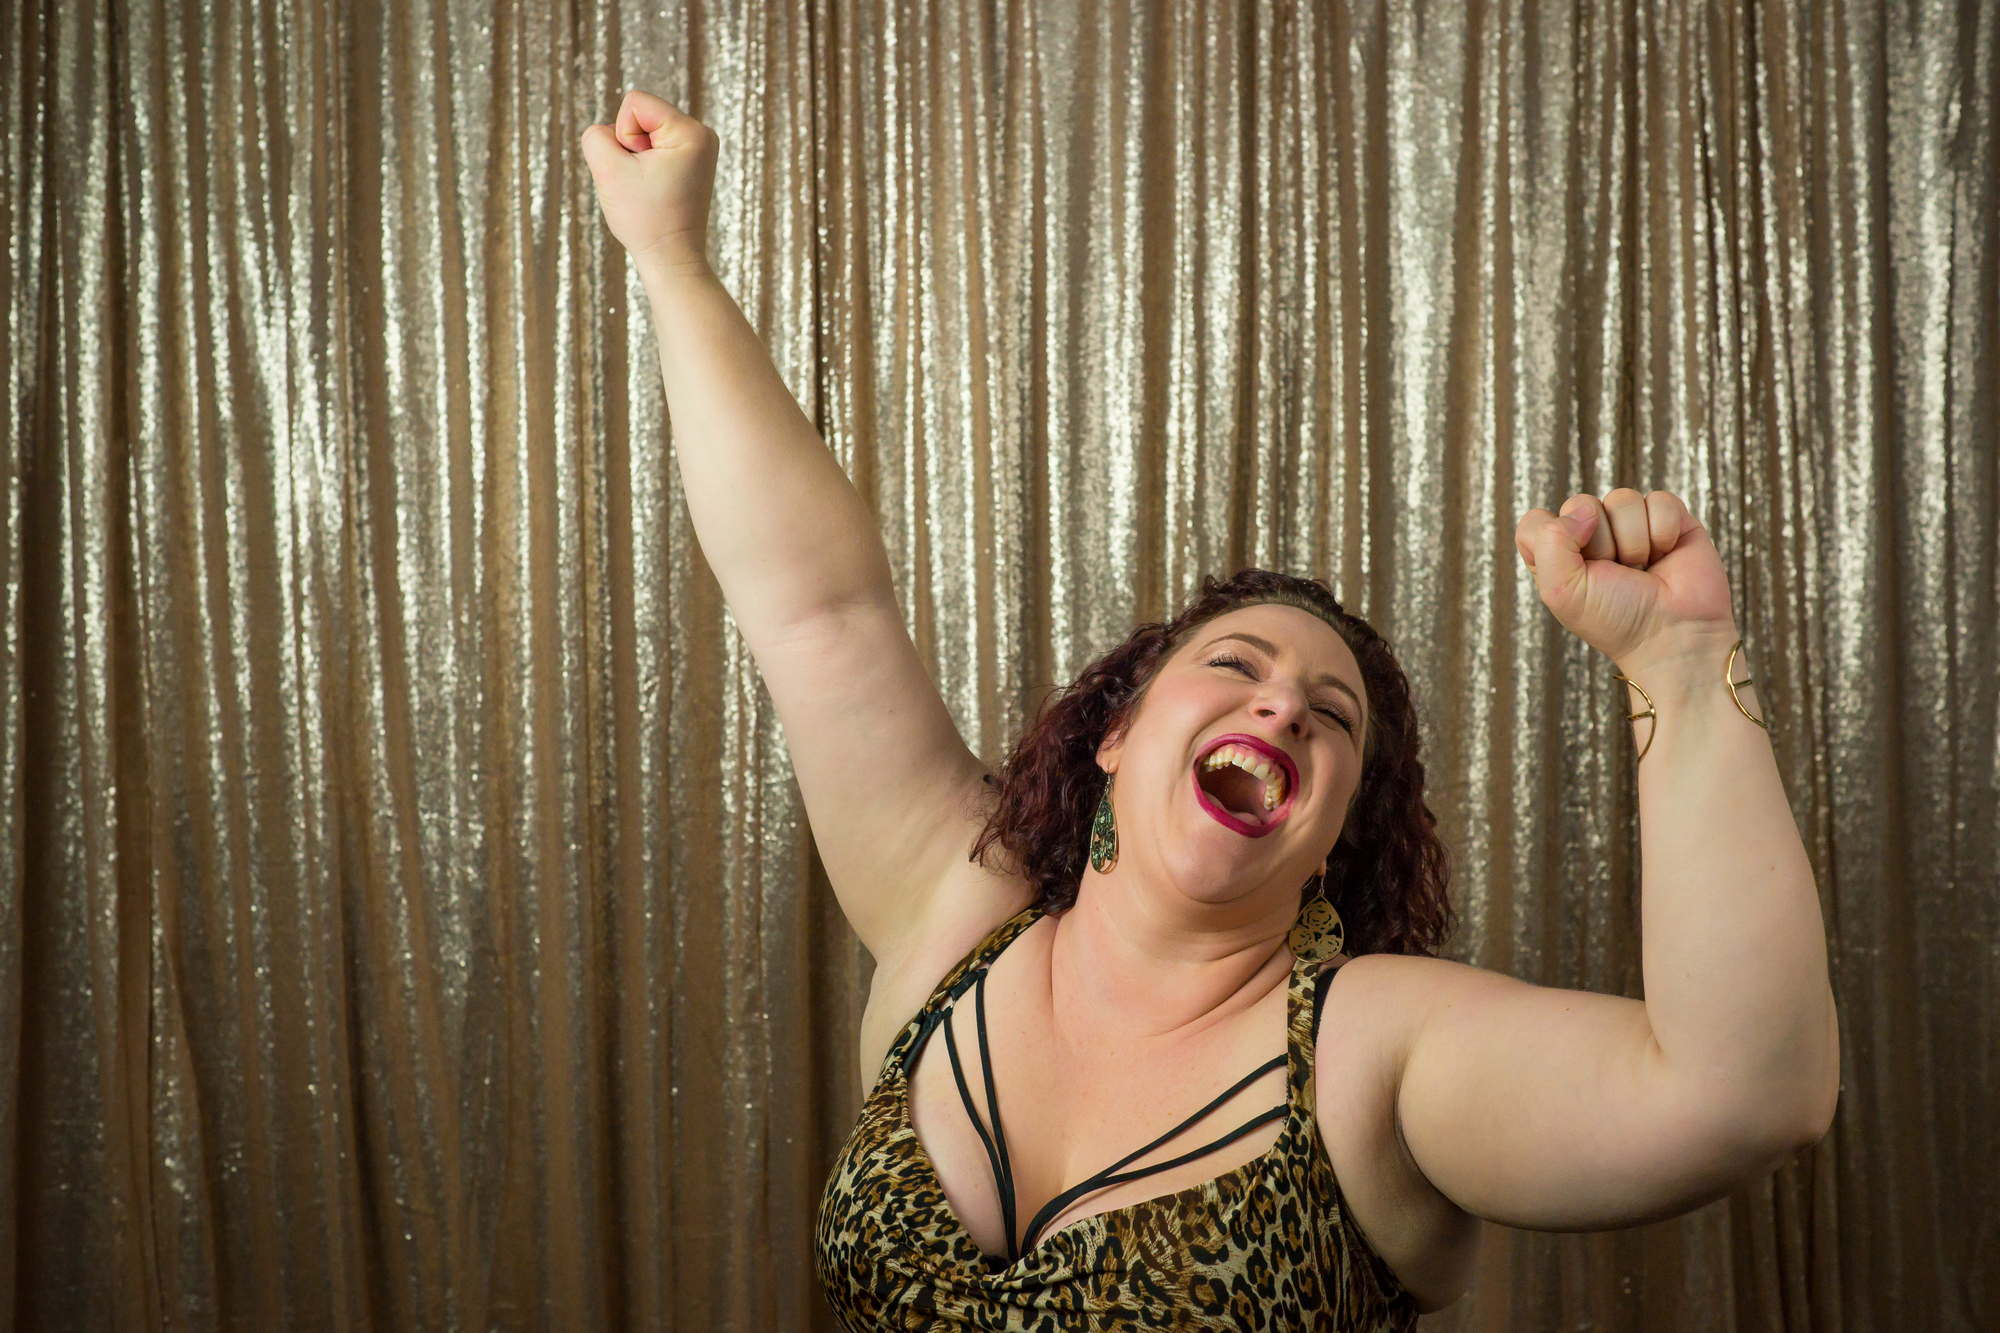 A fat woman dances joyfully in front of a gold curtain